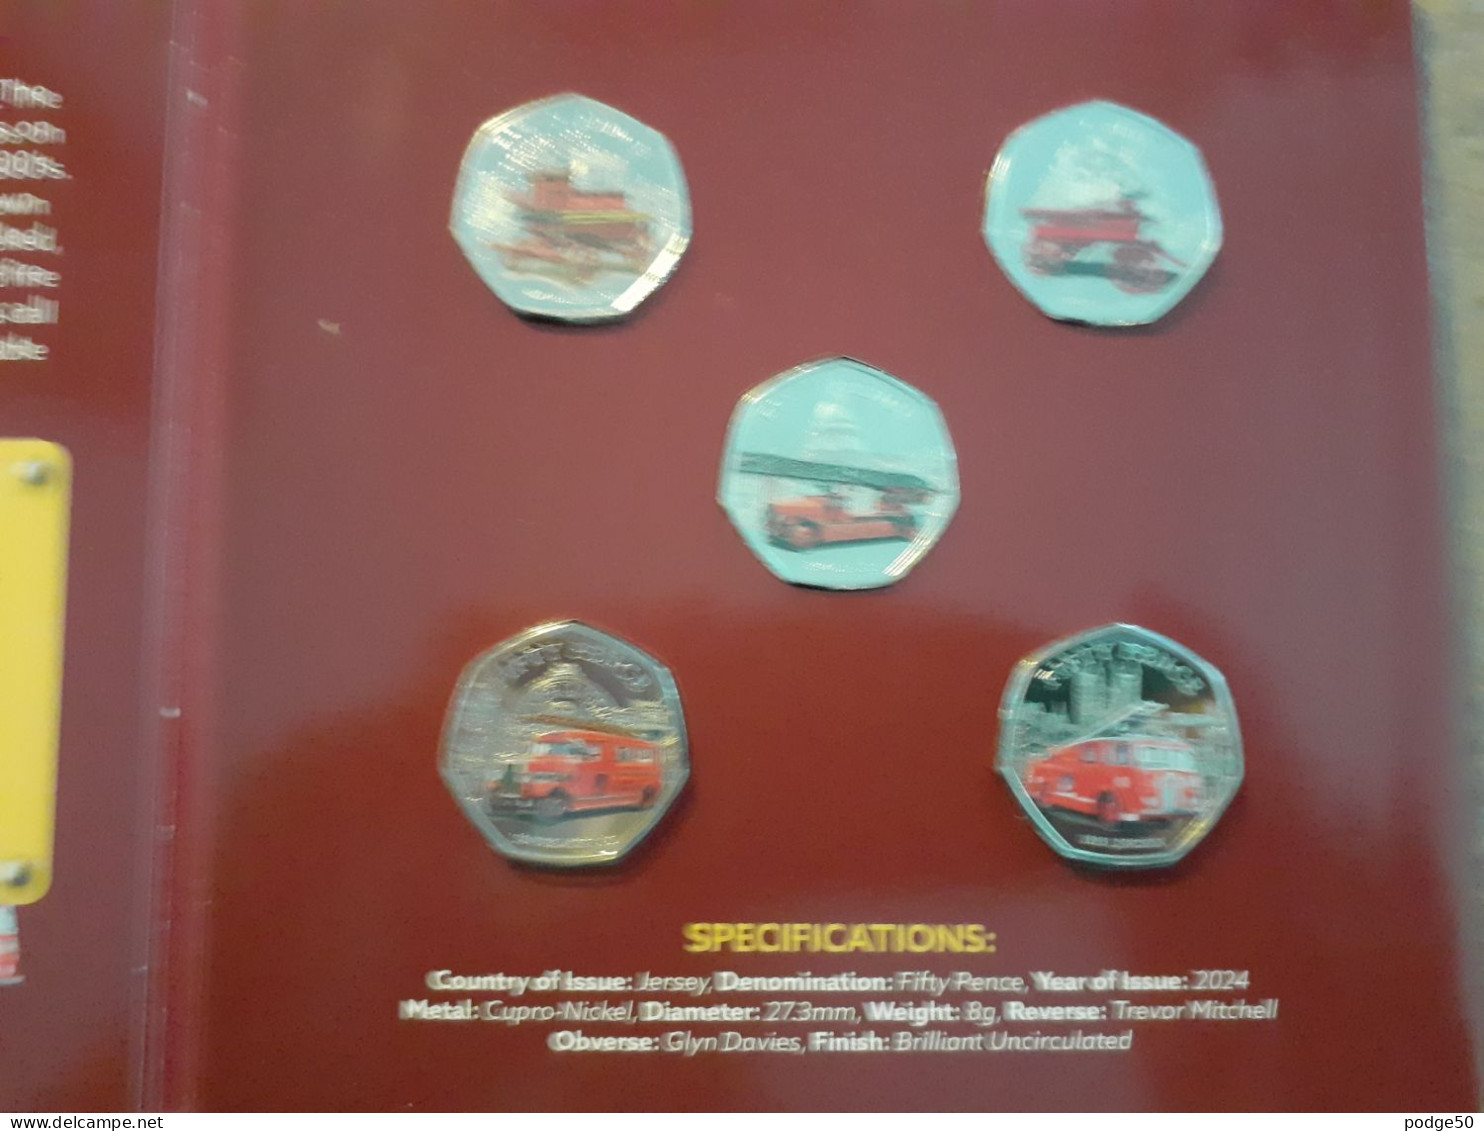 RARE ISLE OF MAN ARTIST'S EDITION FIRE BRIGADE COLOURED FIFTY PENCE COLLECTION ONLY 200 ISSUED - Île De  Man